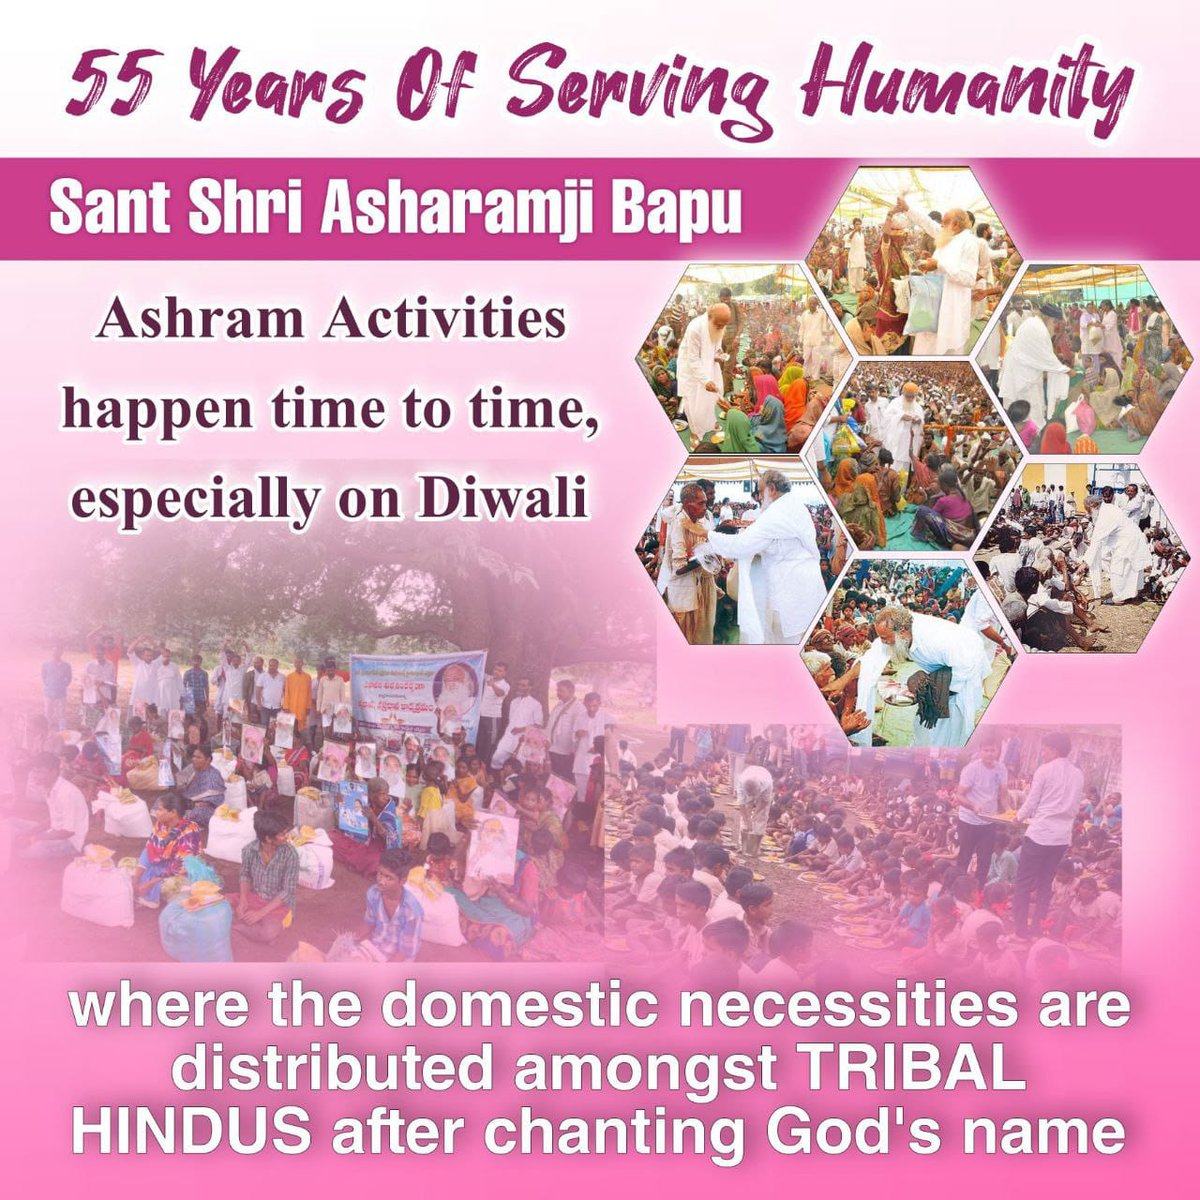 #प्राणिमात्र_के_हितैषी .....Sant Shri Asharamji Bapu because he has working for betterment of society from last 50+ years.

He started Yuva sewa sangh, Mahila utthan mandal who are helping Younger generations and women to become successful in there life.
Inspirational for Society